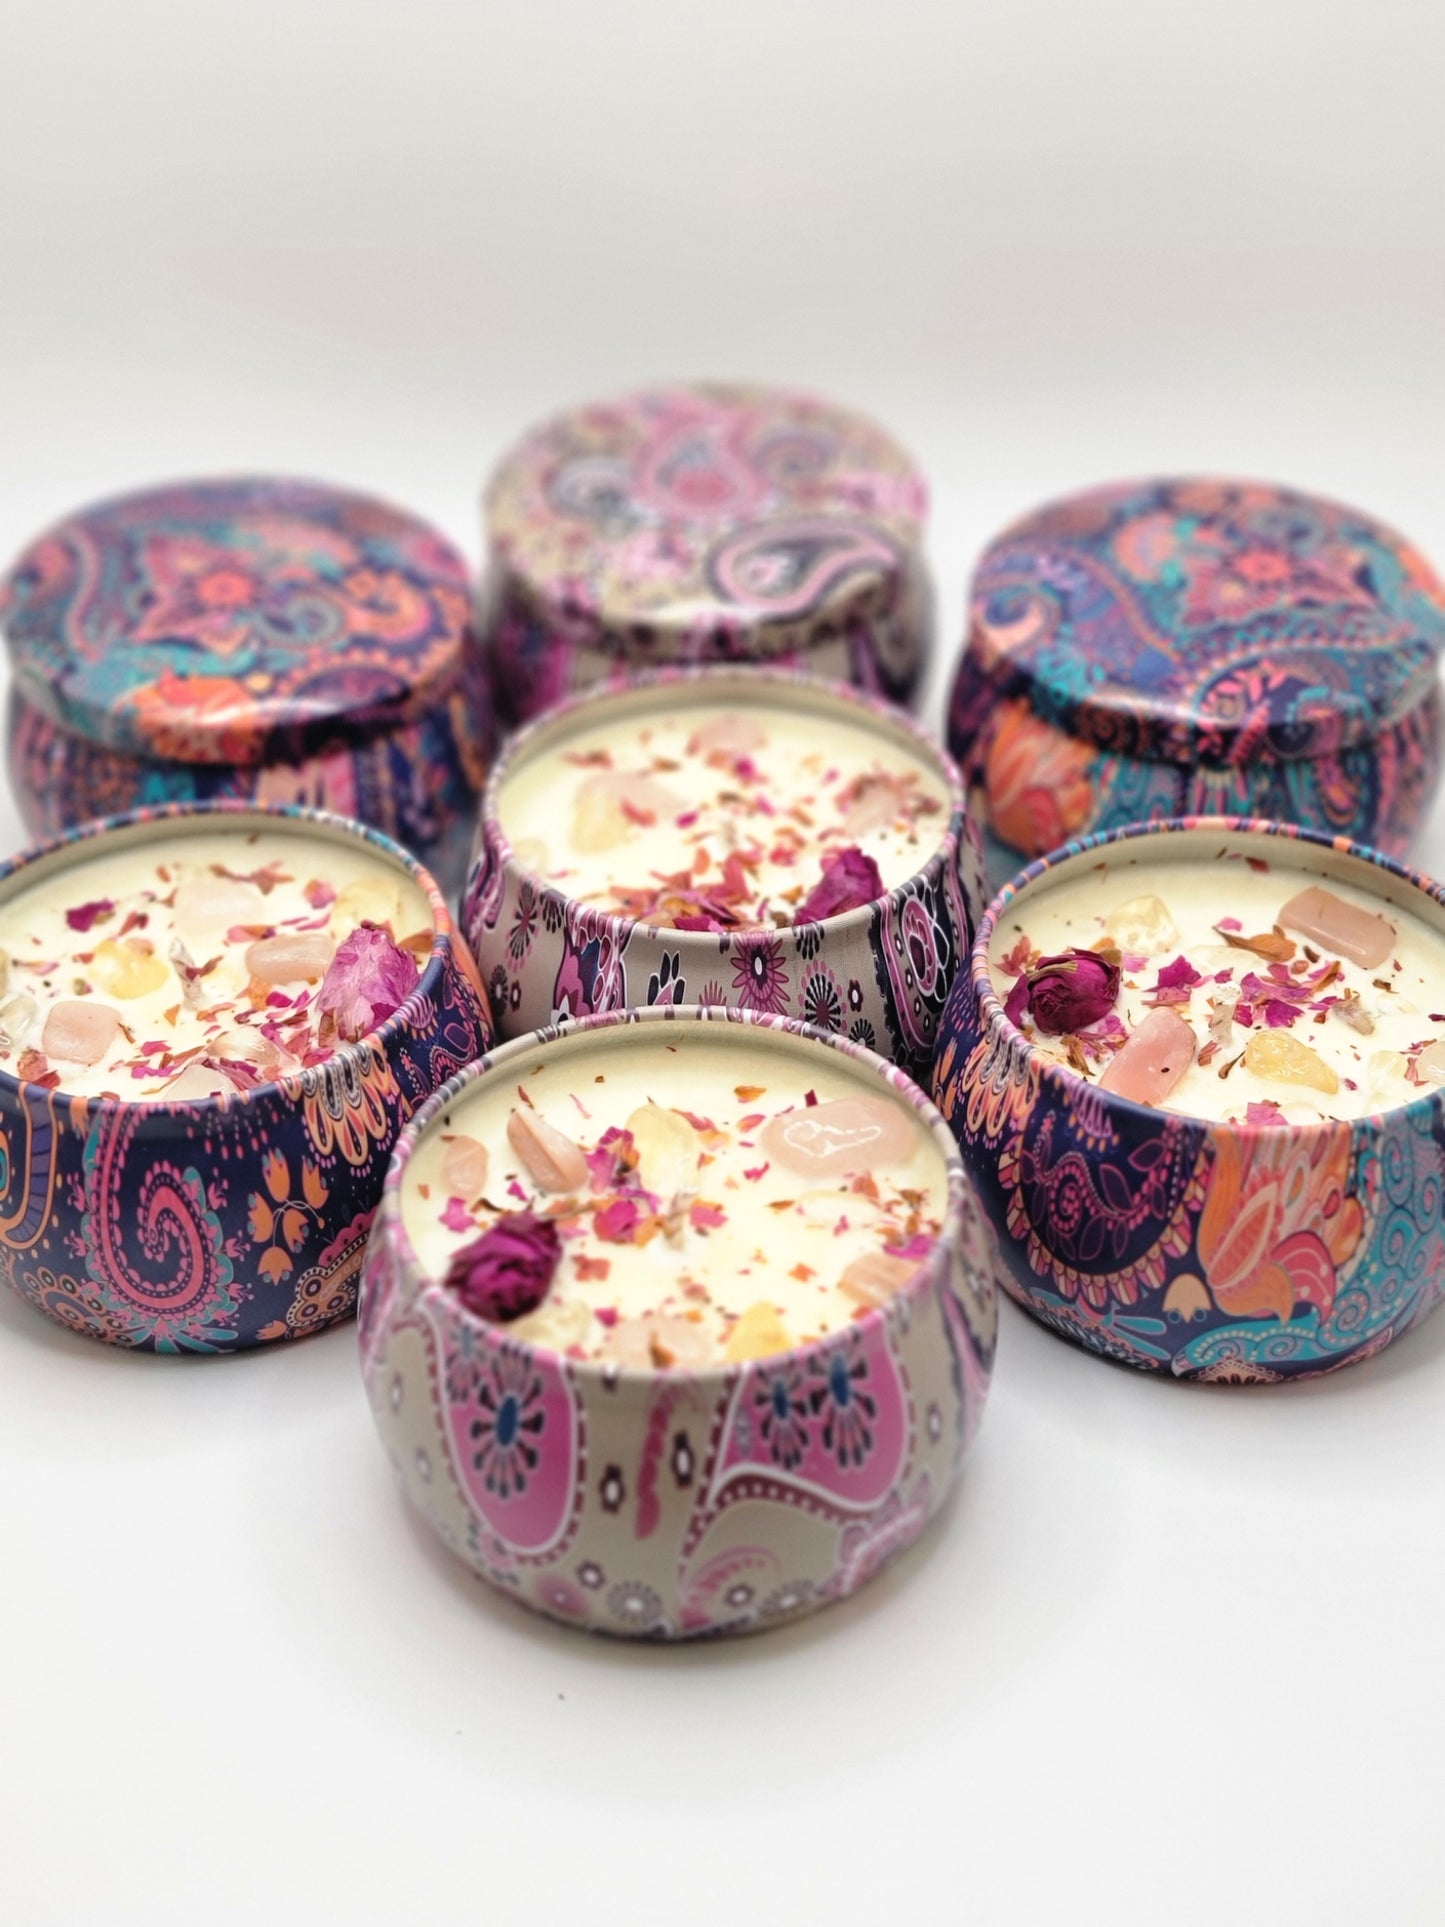 Love & Light Soy Wax Intention Candle Tin